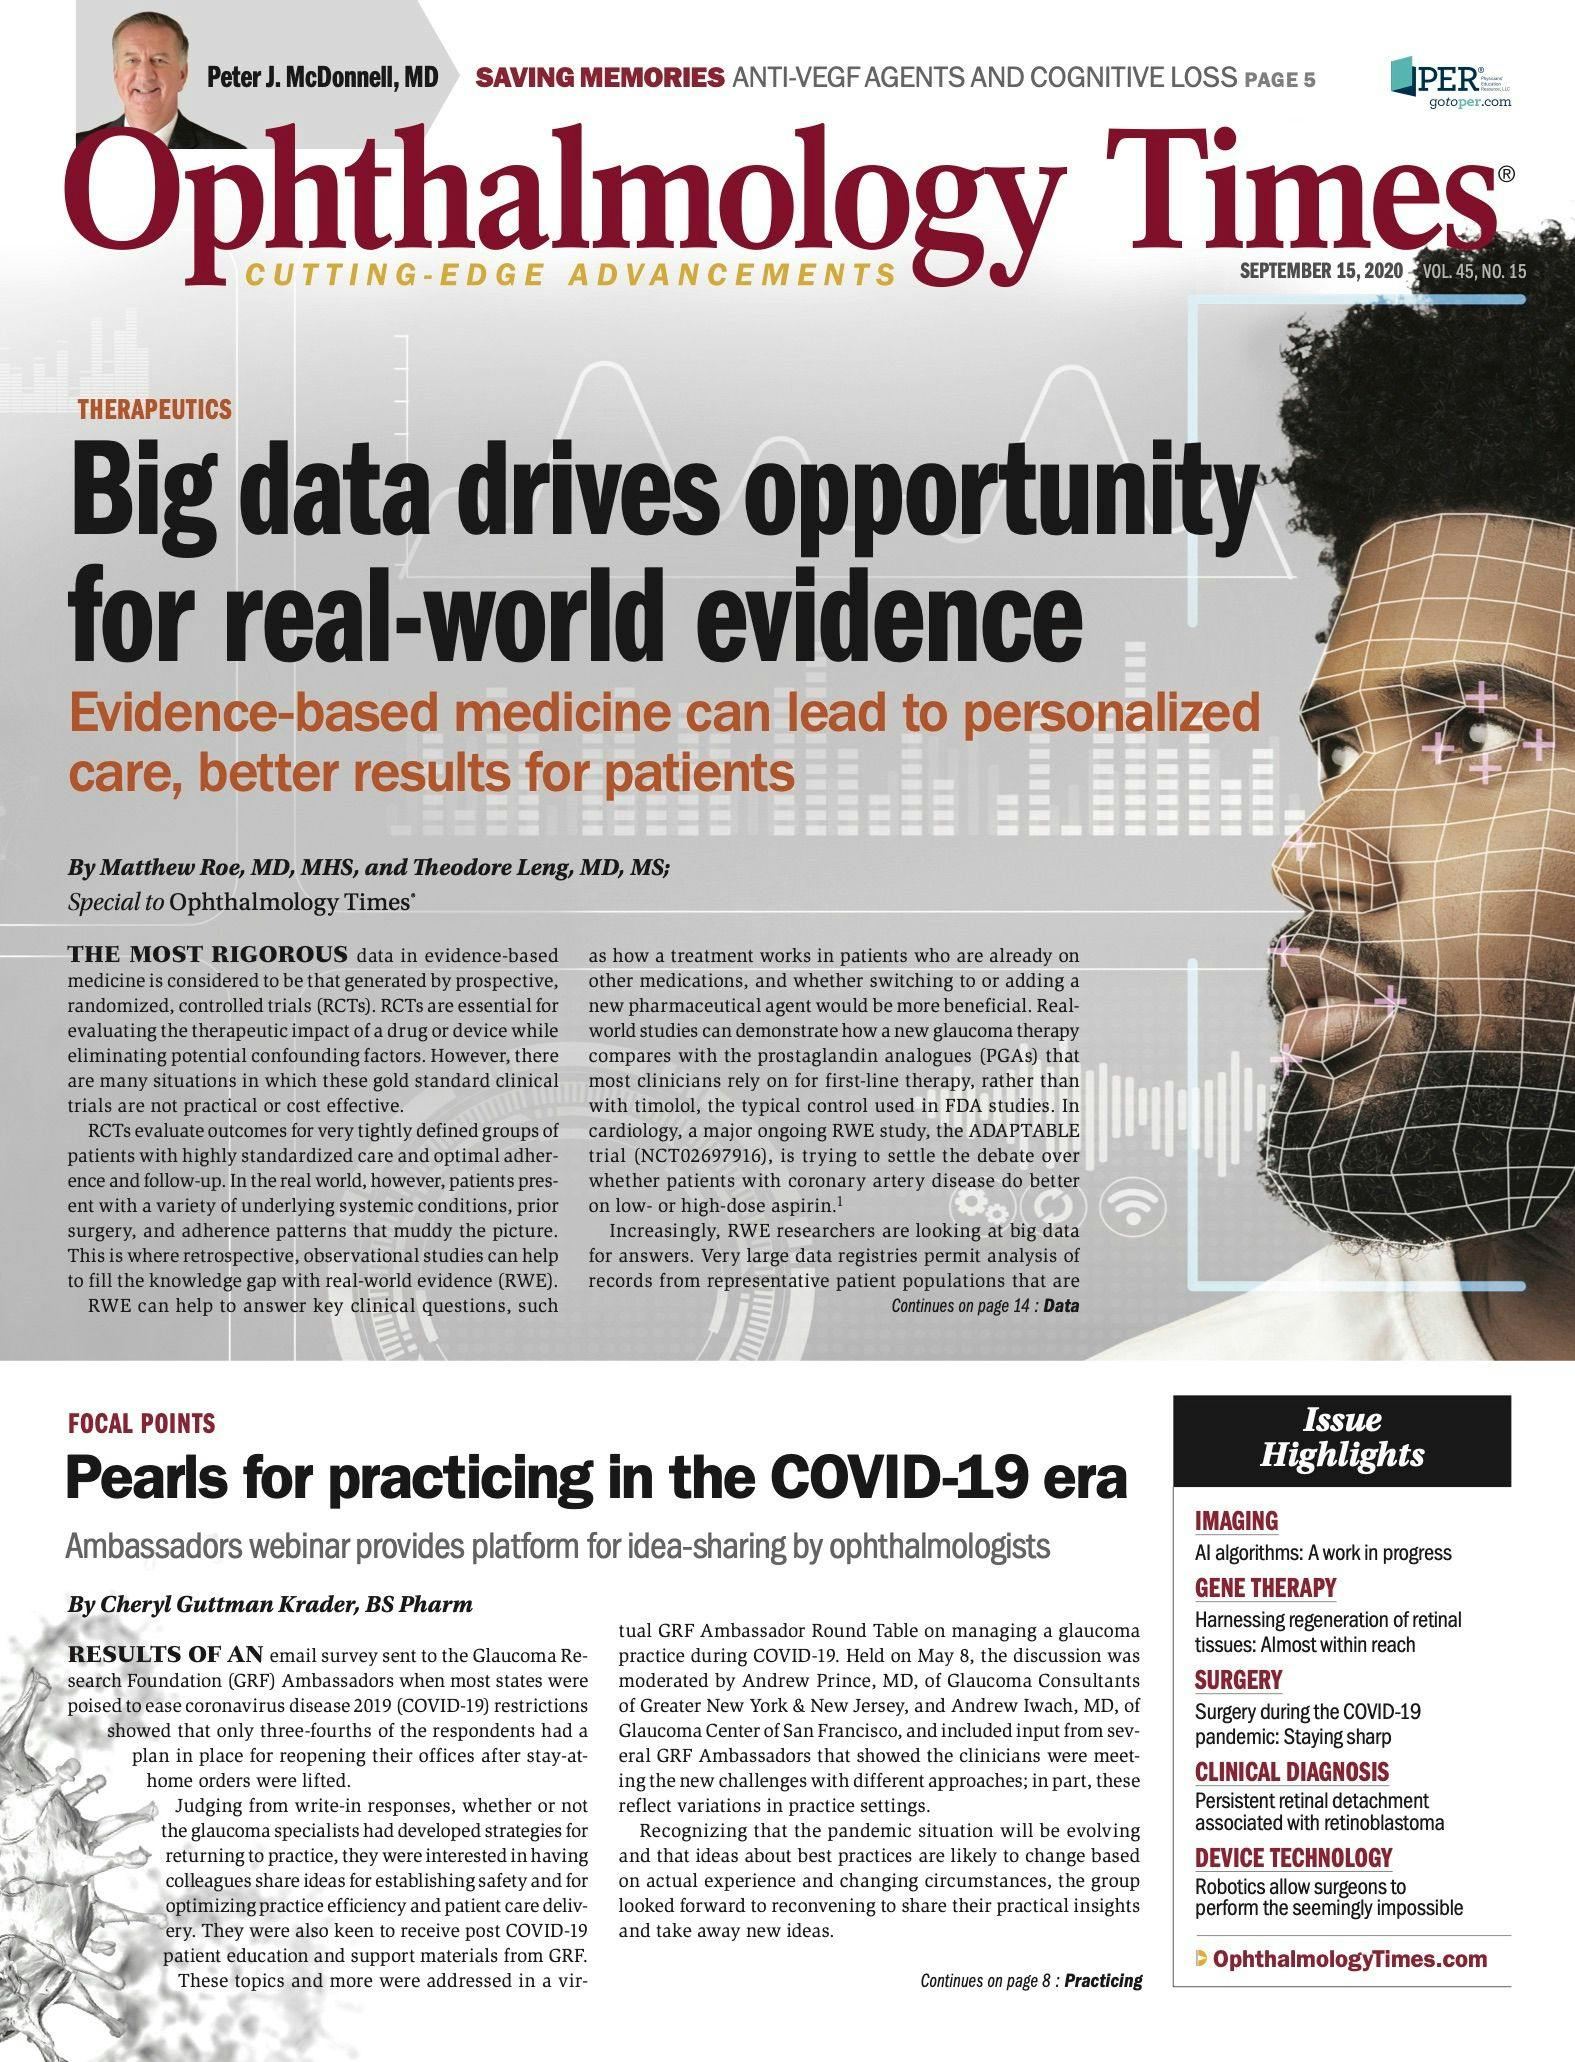 Ophthalmology Times: September 15, 2020